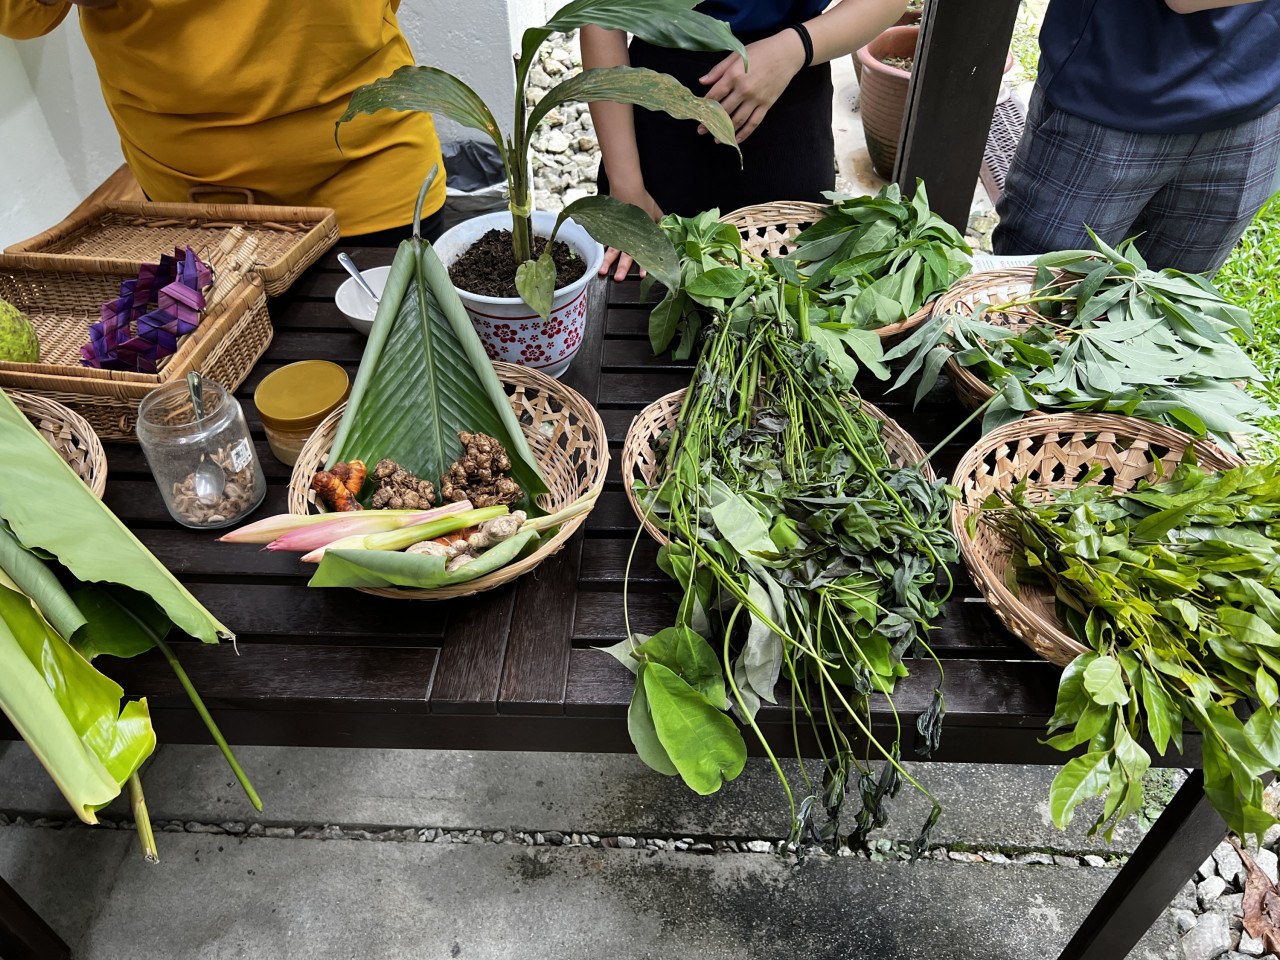 A selection of unique ingredients that gives Orang Asli food (from the Temuan tribe) its character. They include Pucuk getah (rubber shoots), biji getah (rubber nuts), cekur (wild ginger), bunga kantan, breadfruit. – Haikal Fernandez pic